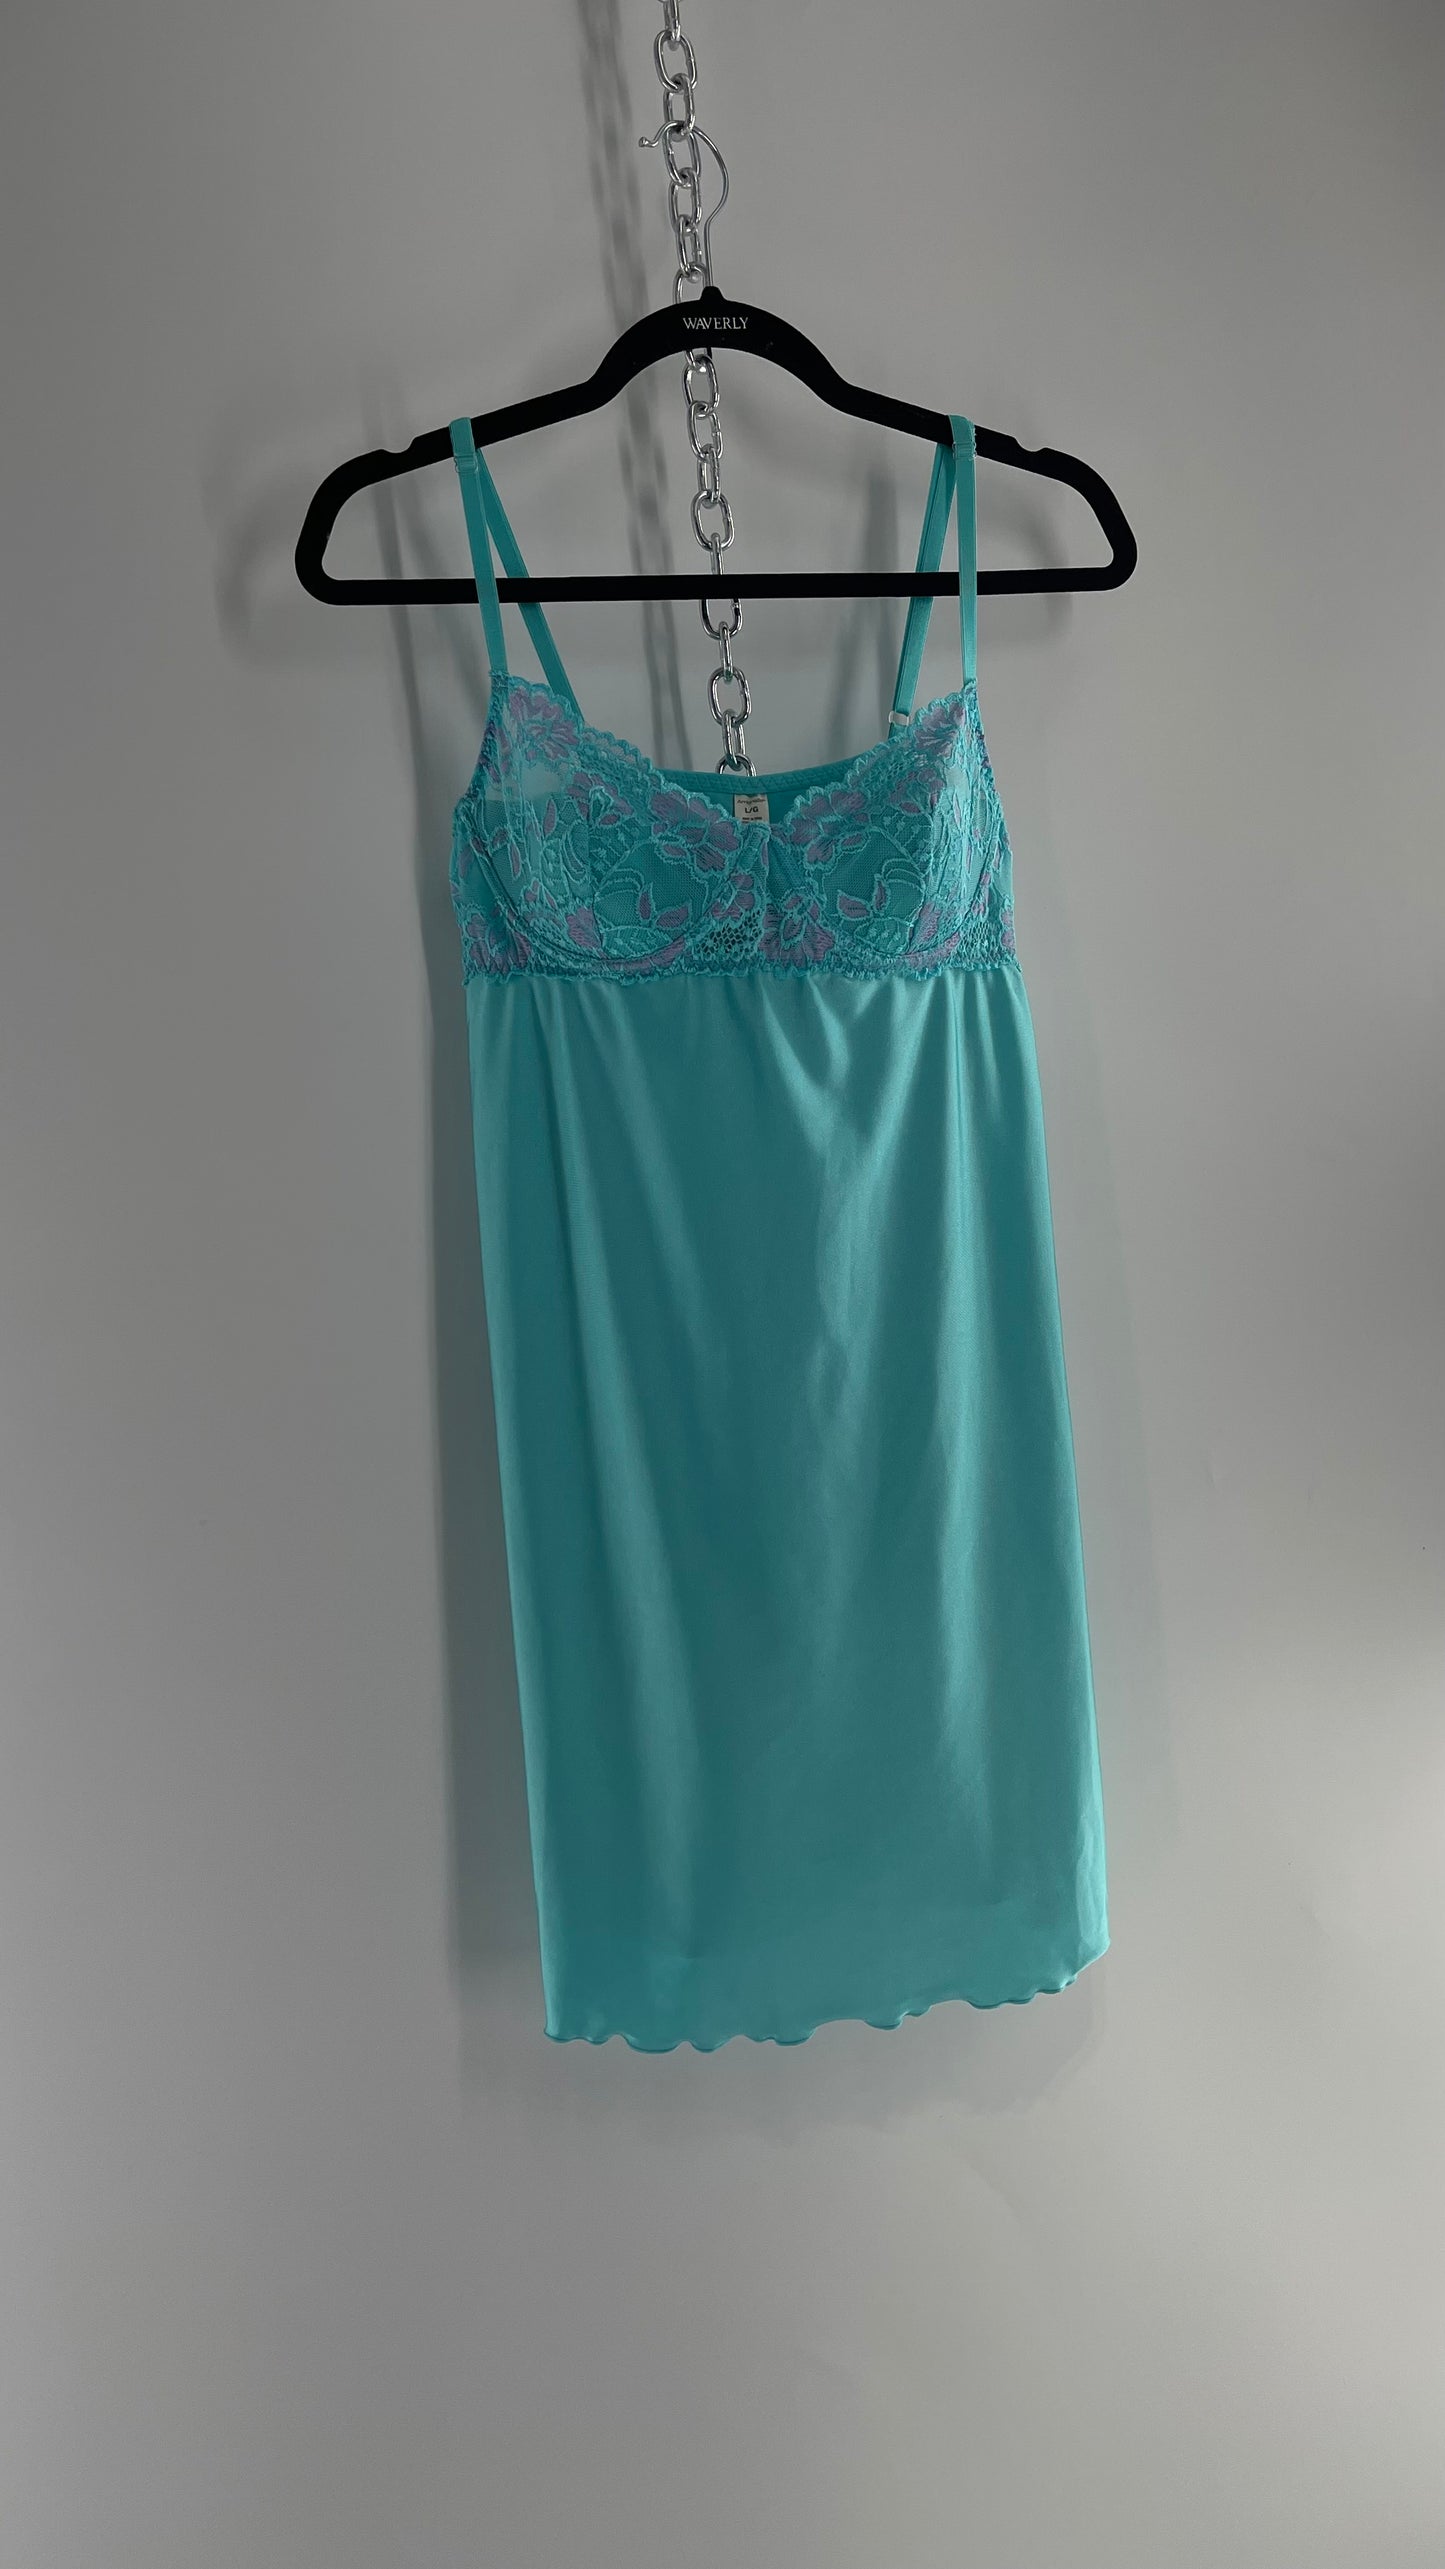 Vintage Baby Blue Balconette Mini Dress with Lace Cups and Purple Details (Large)